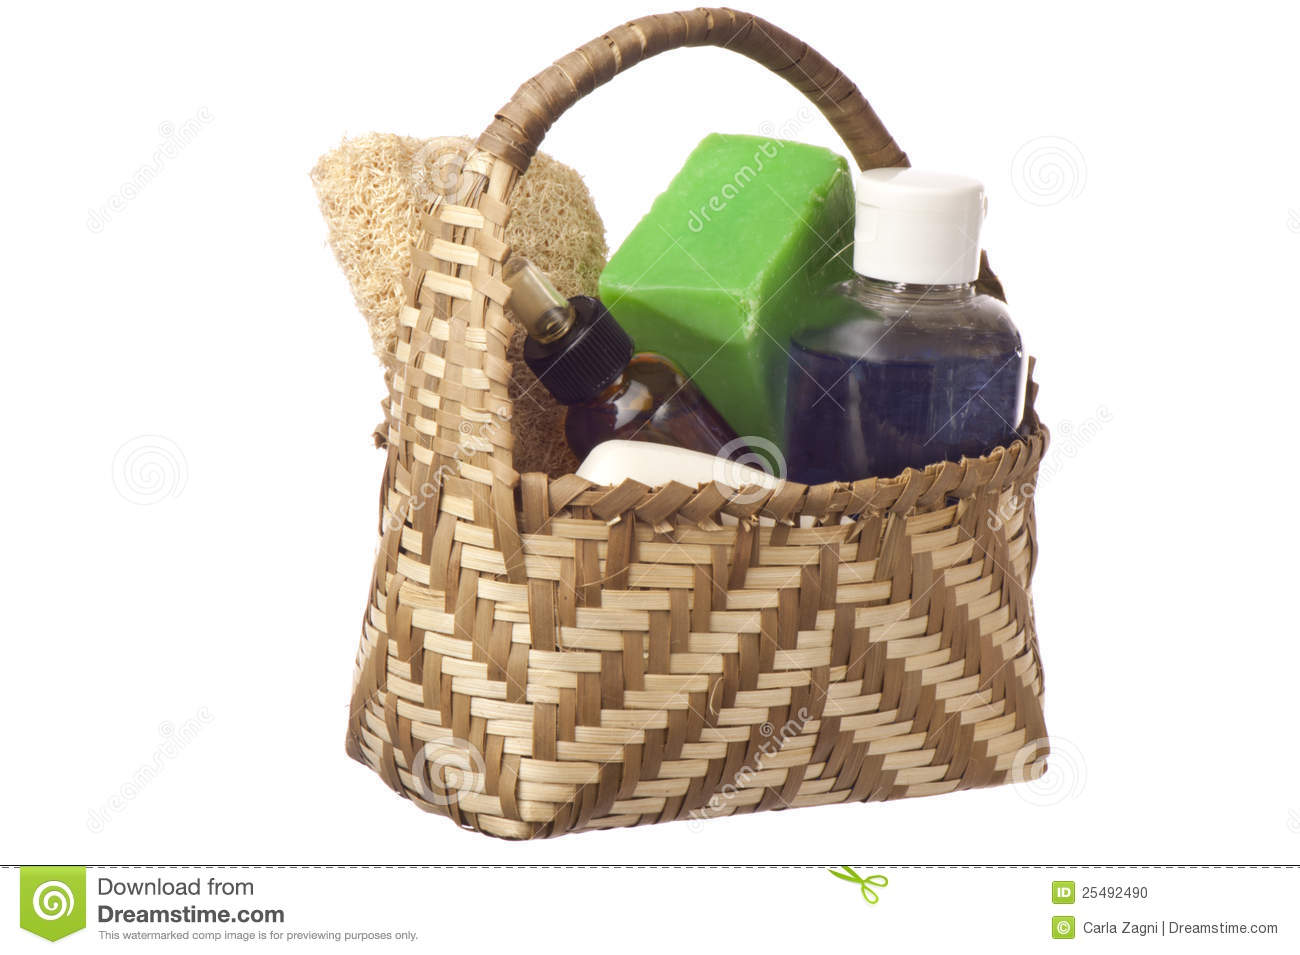 Basket In A Natural Fibers Woven With Products For Personal Hygiene